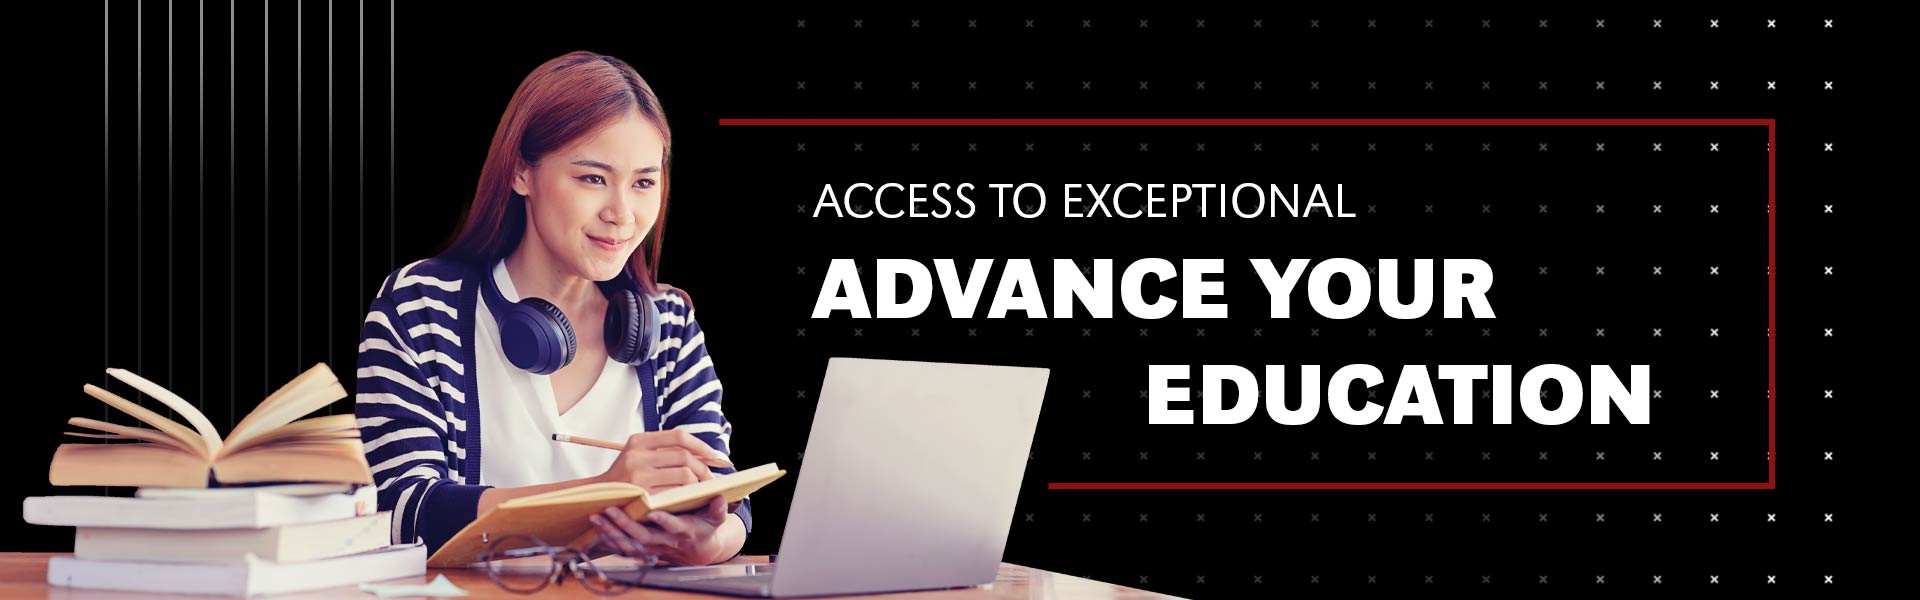 Photo of an individual sitting at a table, using a pencil and notebook in front of an open laptop. Adjacent to the individual and table are the words "ACCESS TO EXCEPTIONAL - ADVANCE YOUR EDUCATION".